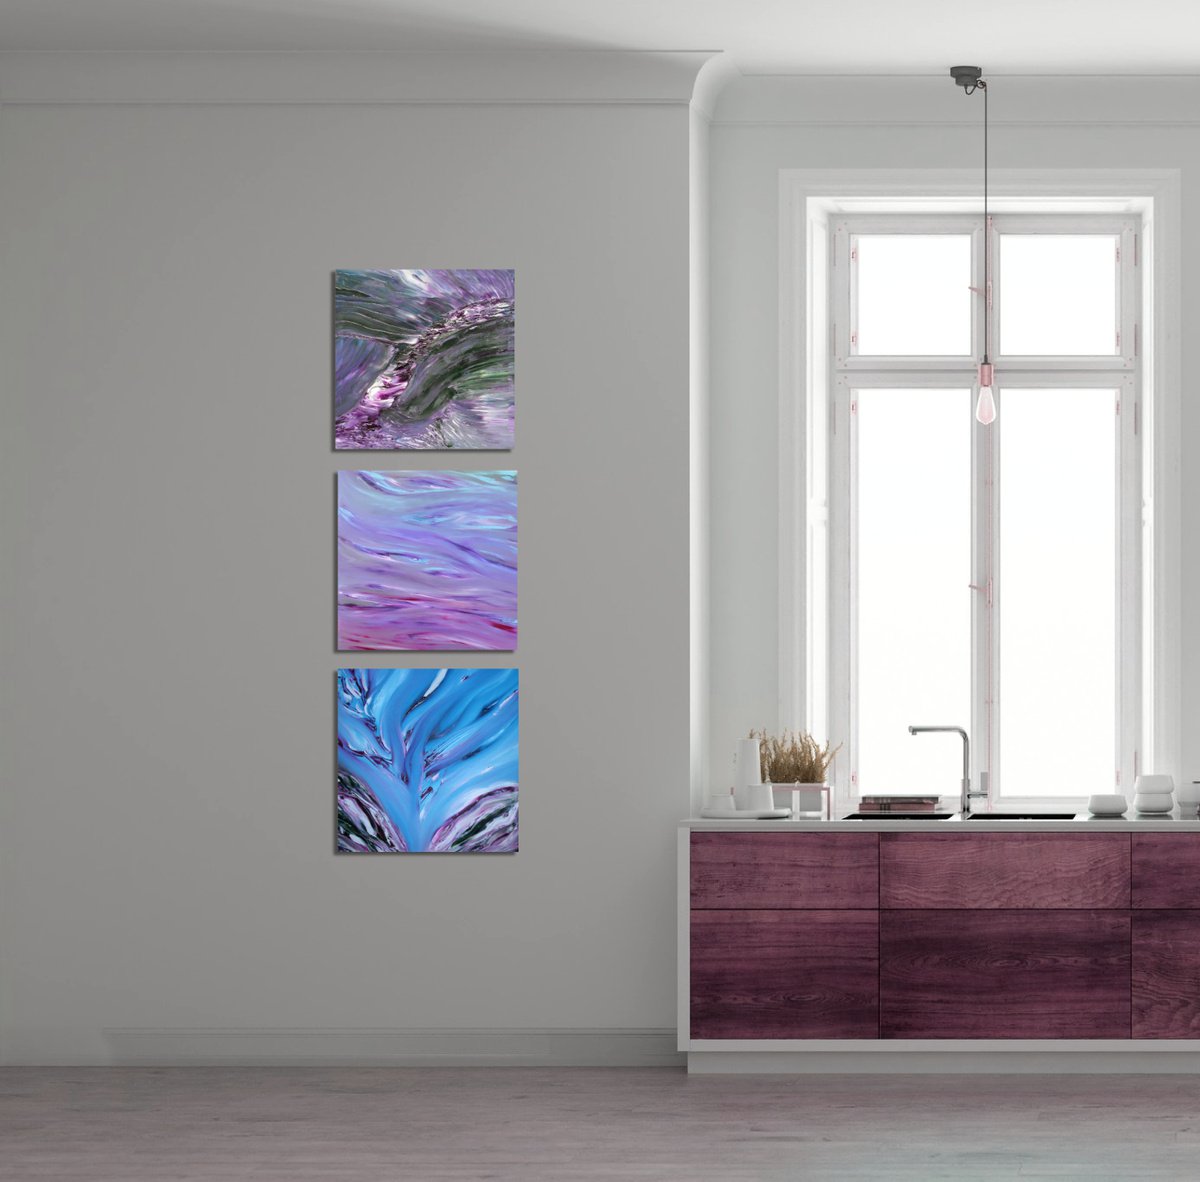 Mantra therapy - Full Series - Triptych n? 3 Paintings, Original abstract, oil on canvas by Davide De Palma